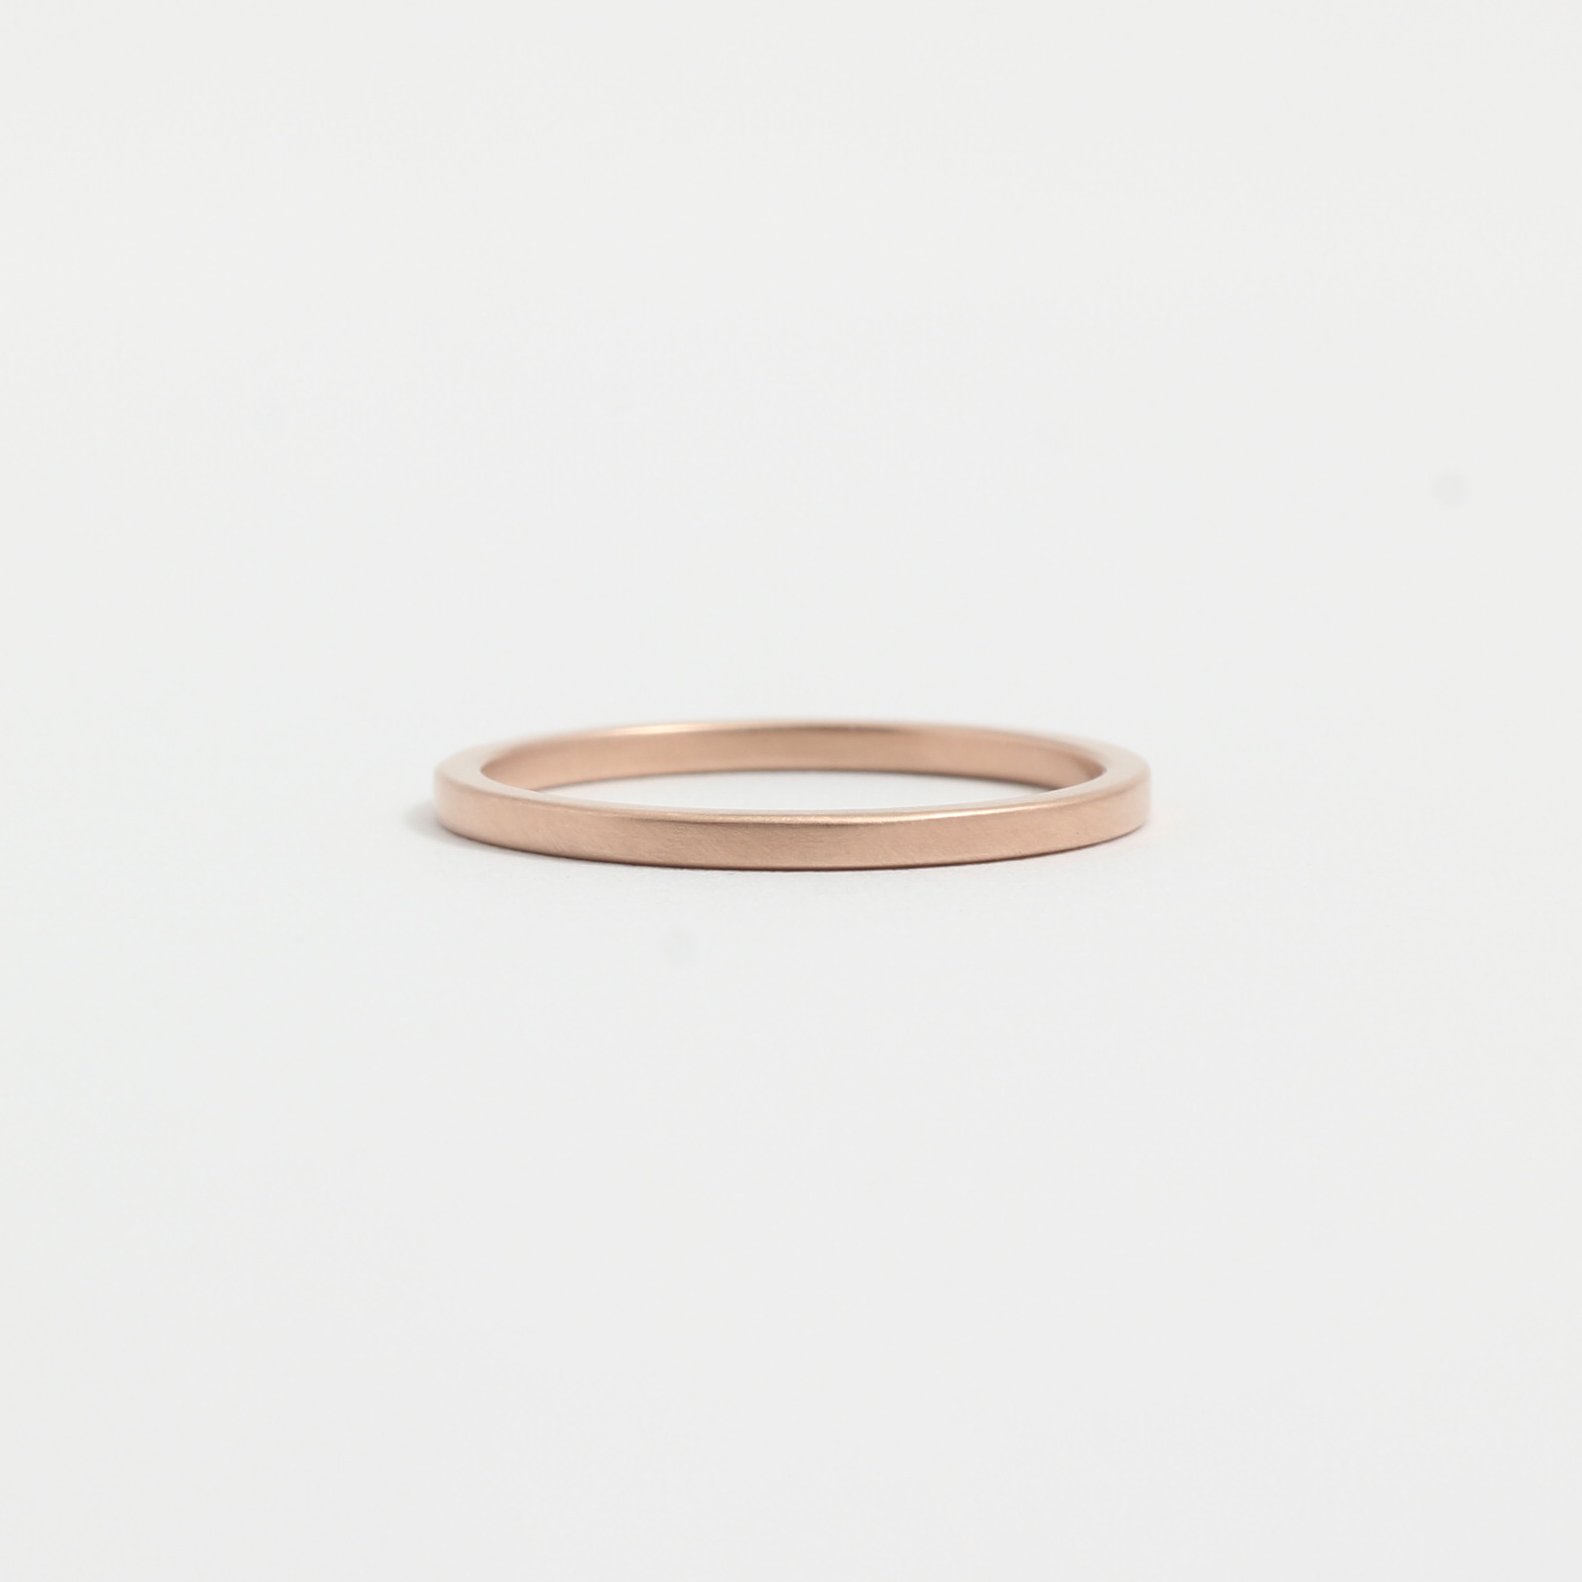 A simple gold wedding band.